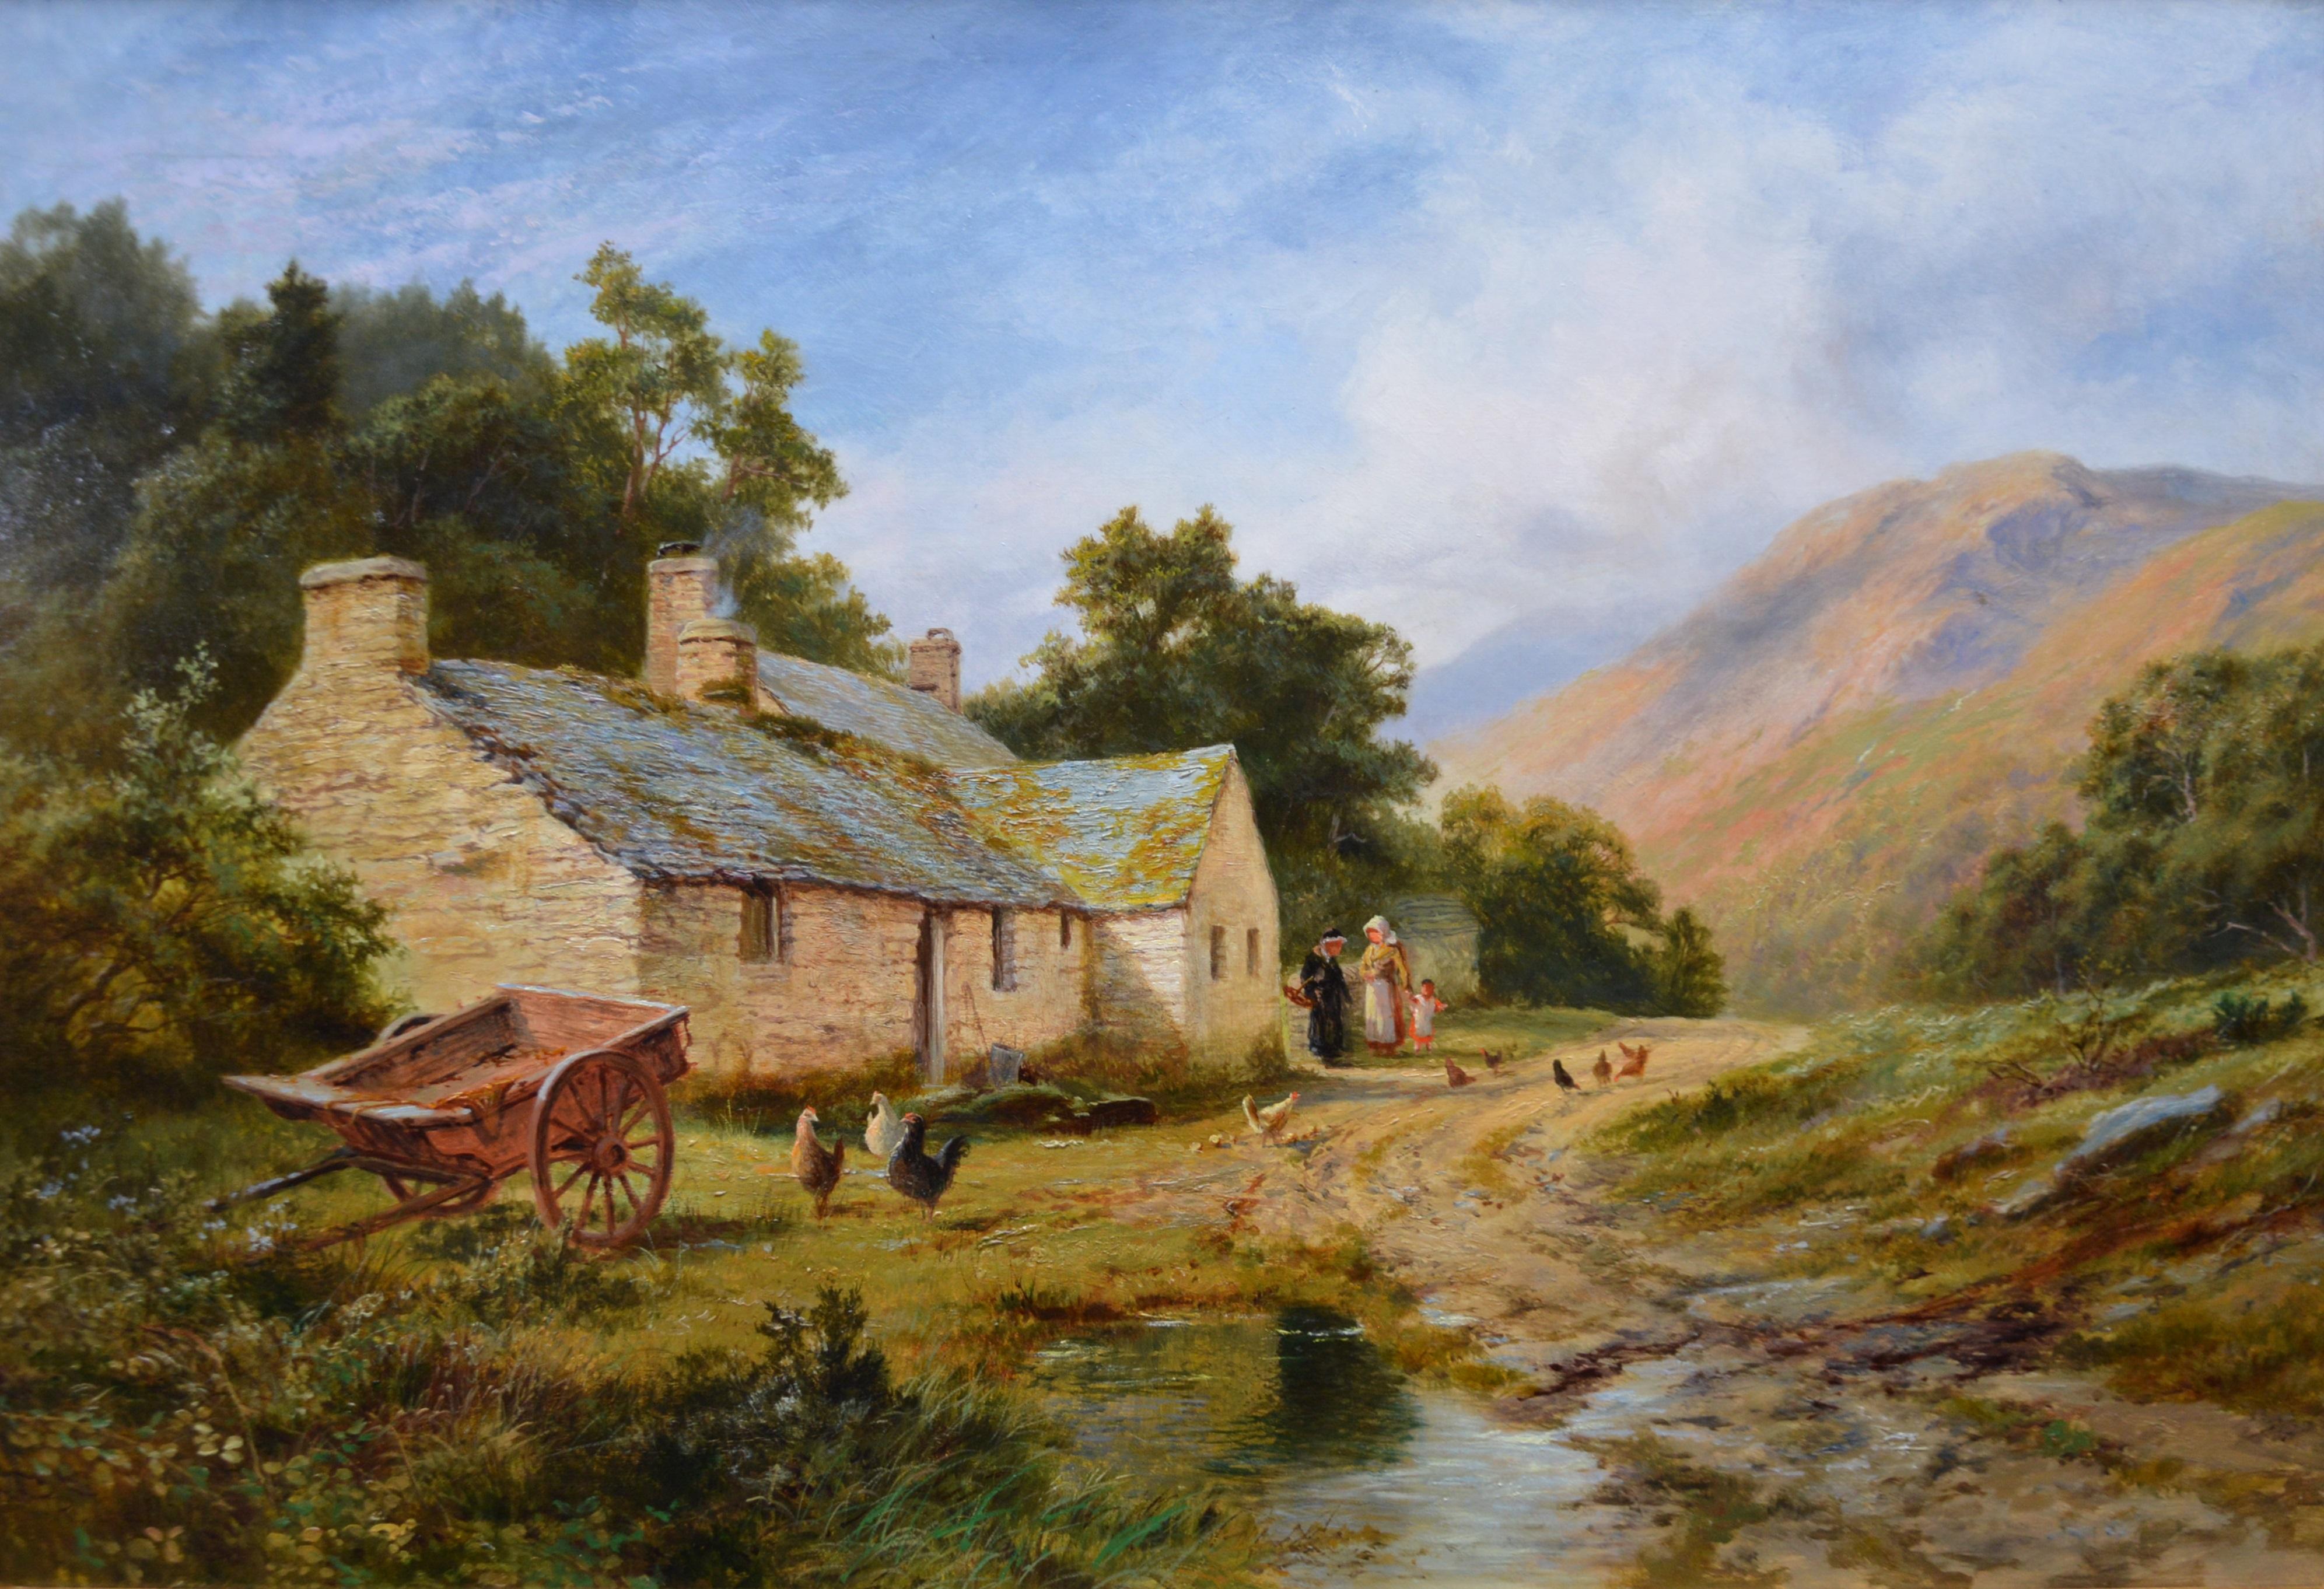 ‘In the Lledr Valley’ by Robert Gallon (1845-1925). The painting - which depicts a mother and child outside a Welsh cottage on a summer’s day - is signed by the artist and hangs in a newly commissioned gold metal leaf frame of fine quality.

Academy